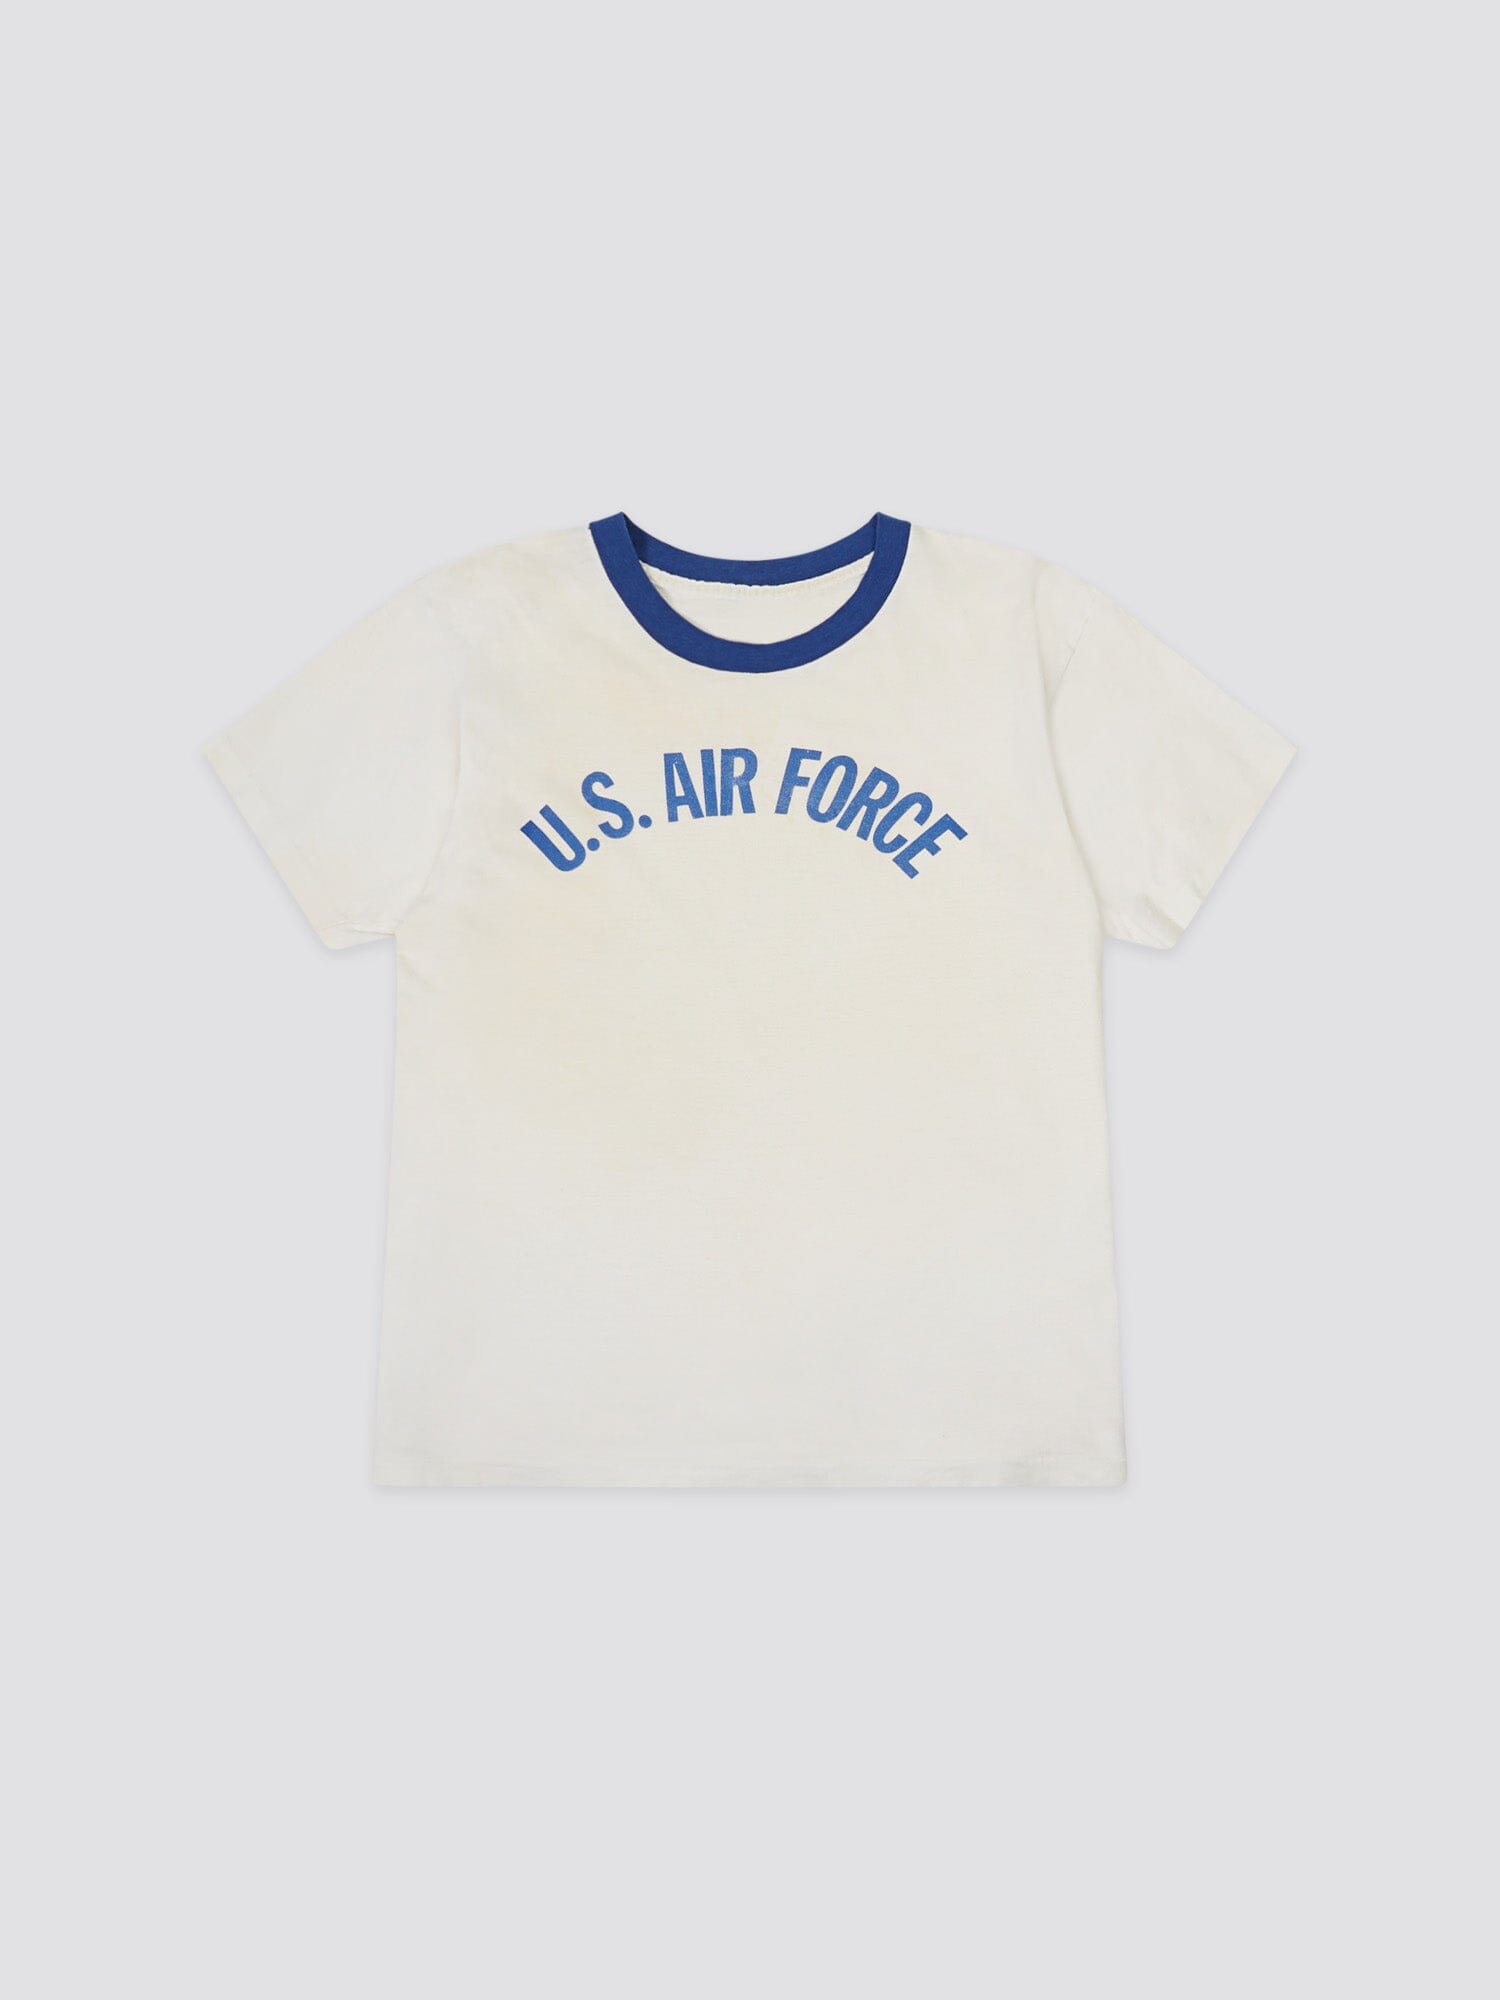 US AIR FORCE 1970S RINGER TSHIRT TOP Alpha Industries WHITE M 